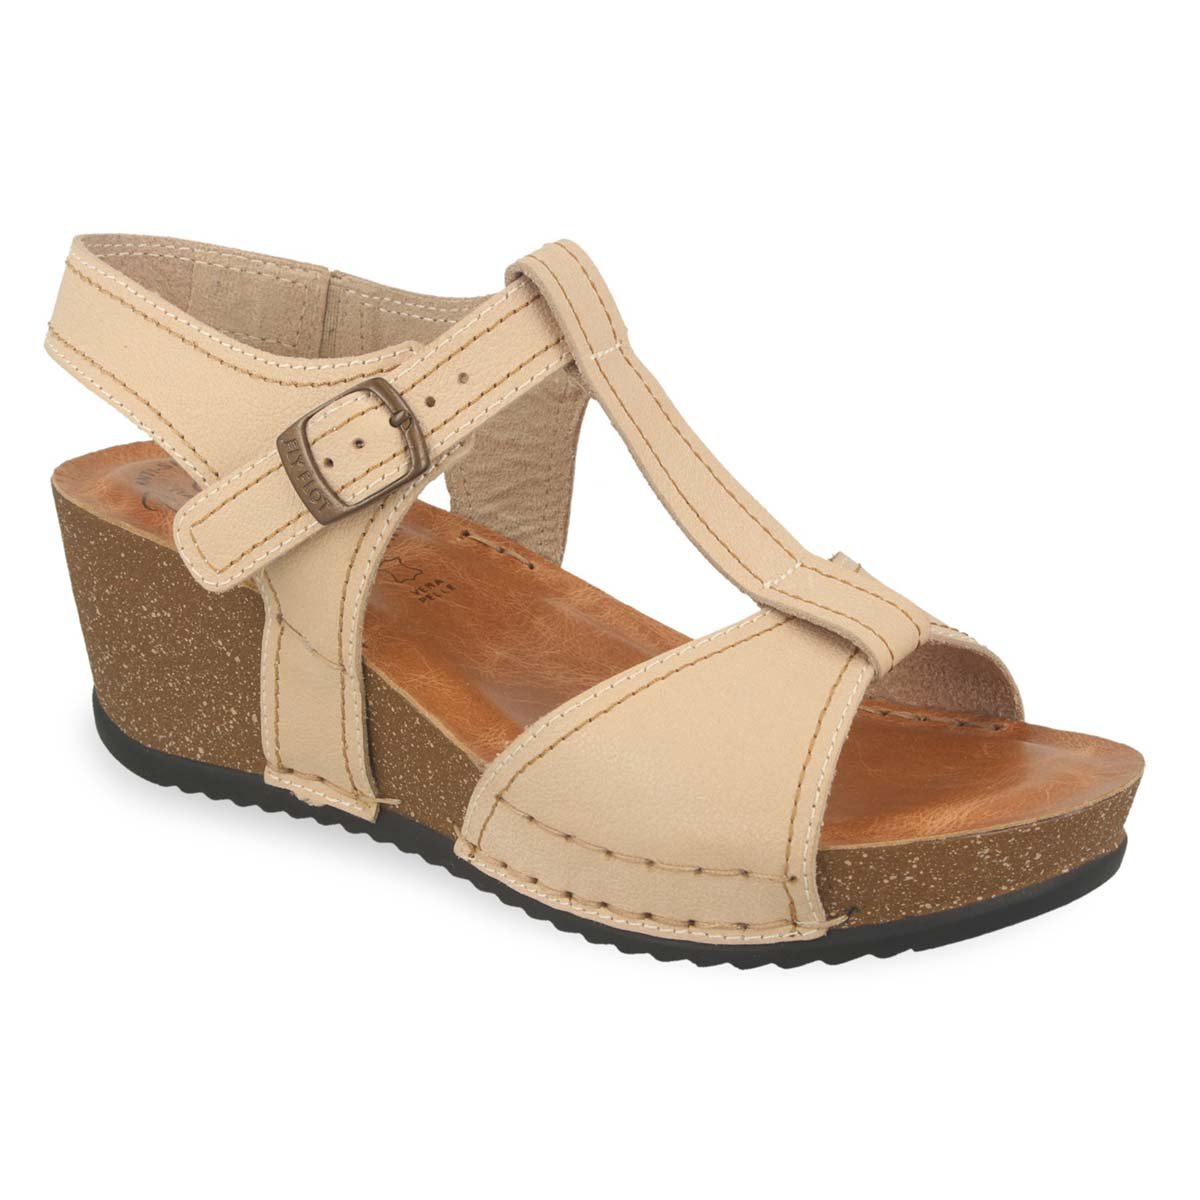 See the Leather Buckle  Wedge Back Strap With Anti-Shock Cushioned Leather Insole in the colour BEIGE, available in various sizes